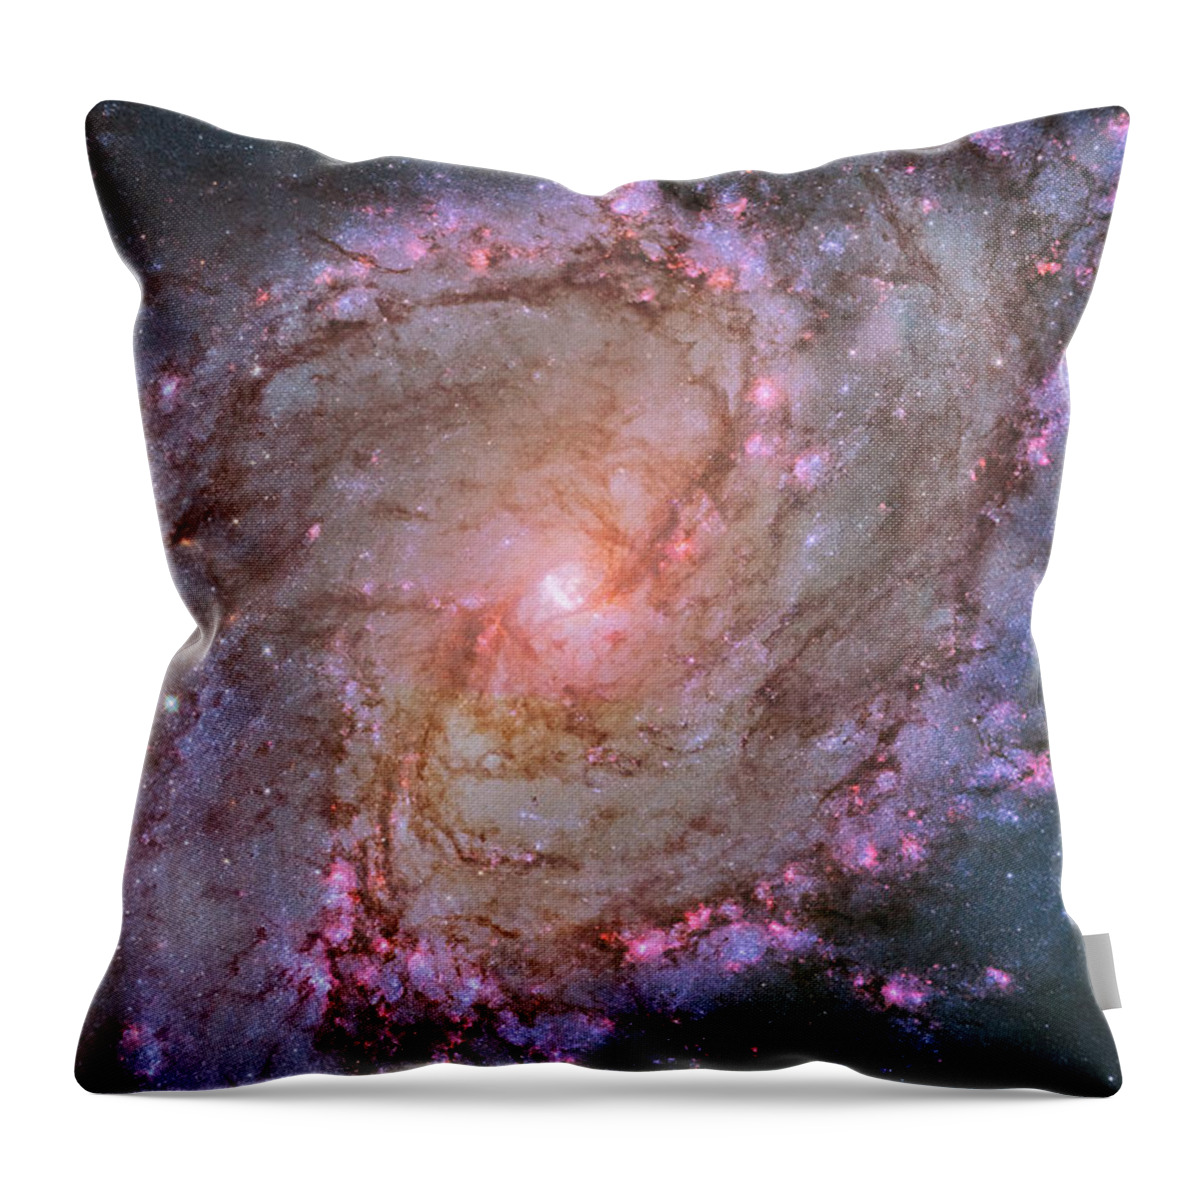 M83 Throw Pillow featuring the photograph M83 by Ricky Barnard